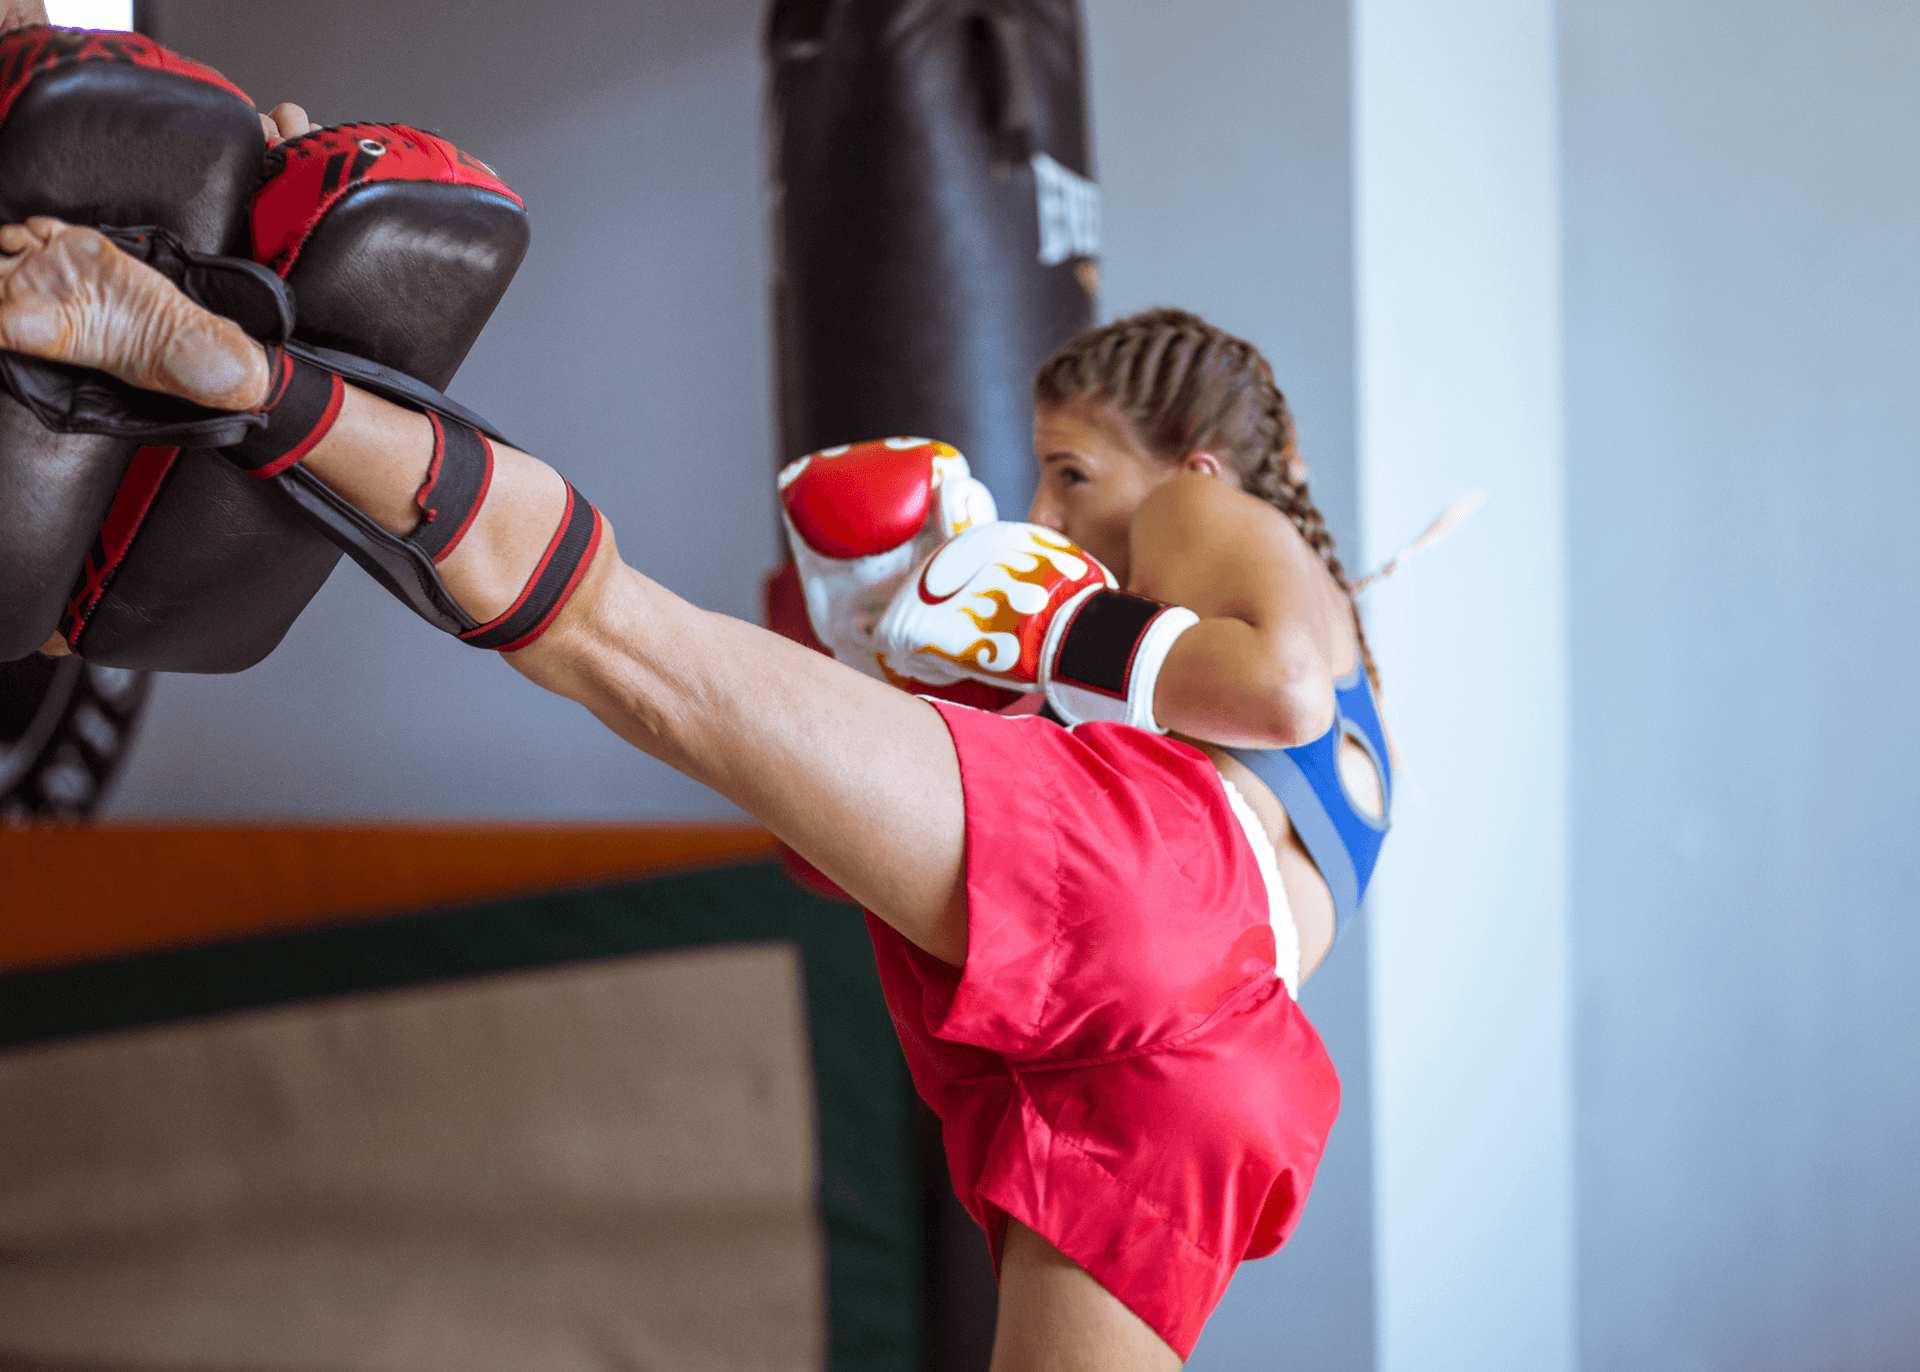 Private Lessons - Kickboxing, Karate, Martial Arts